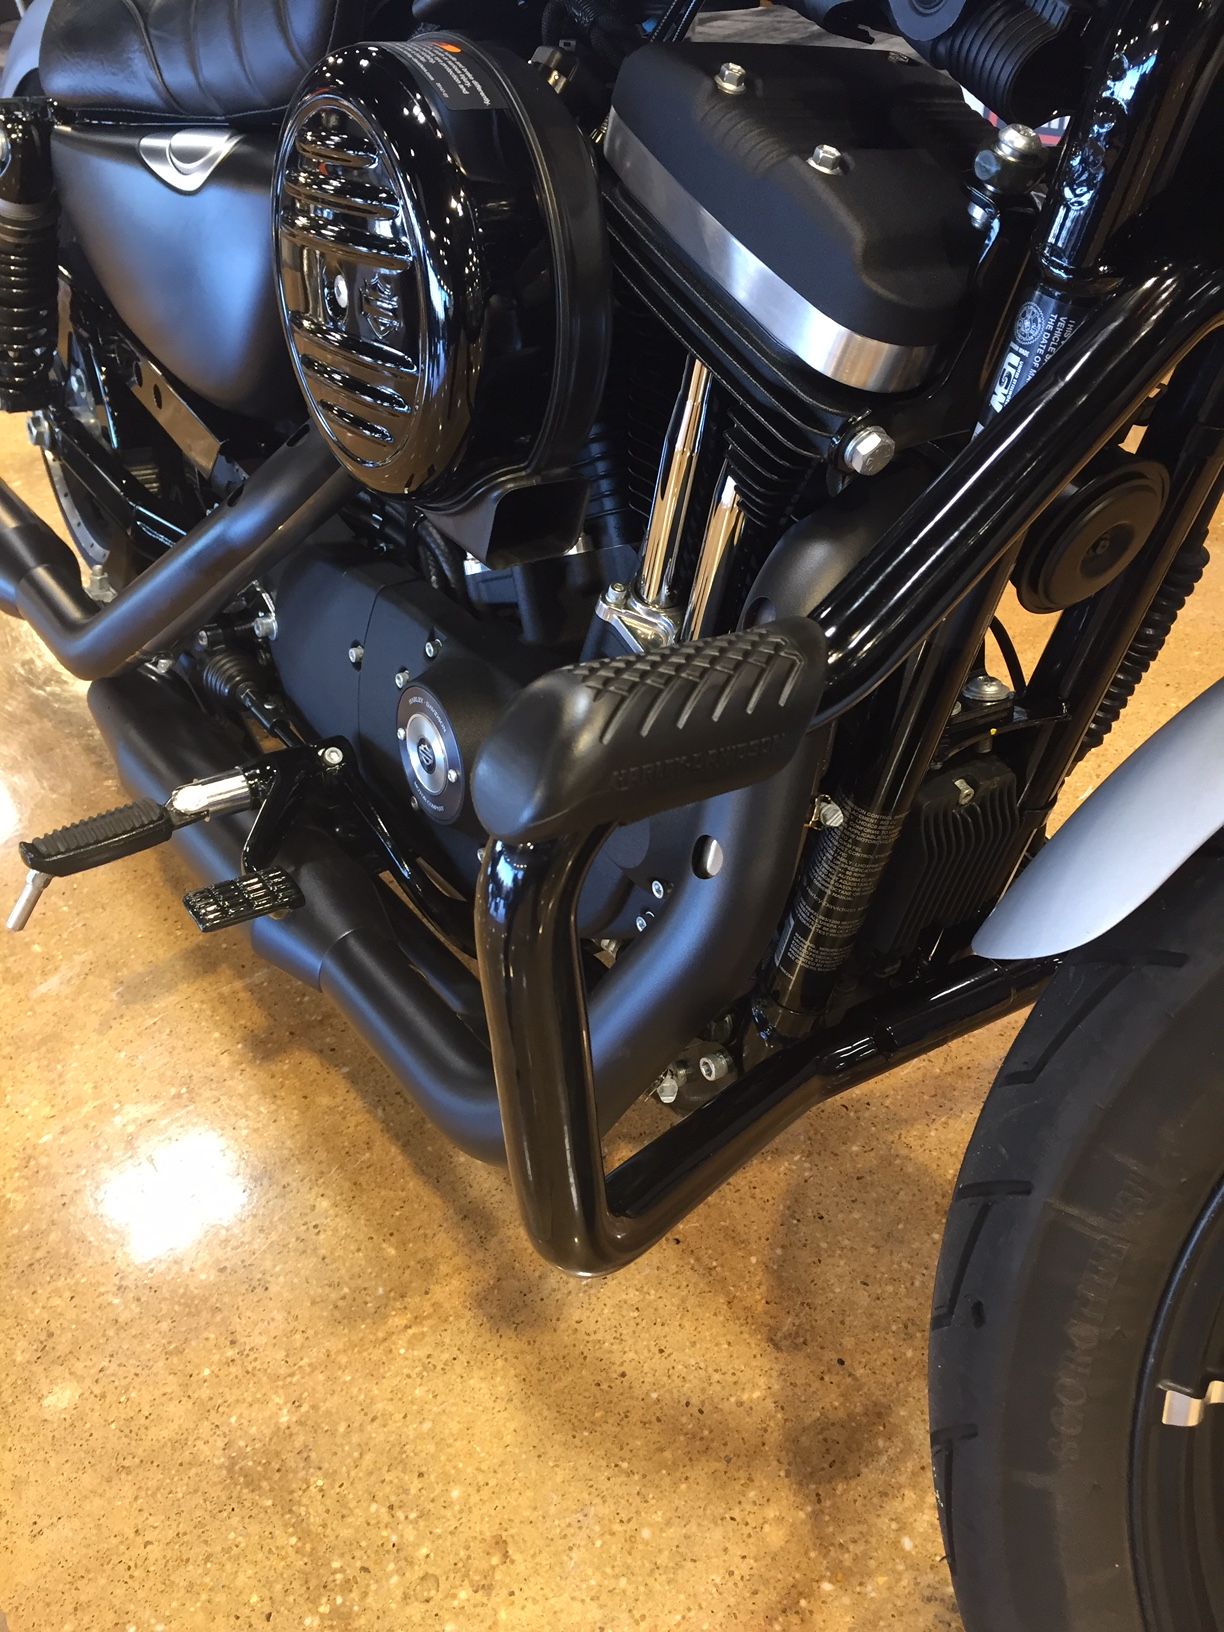 2020 Harley-Davidson IRON 883 in West Long Branch, New Jersey - Photo 7